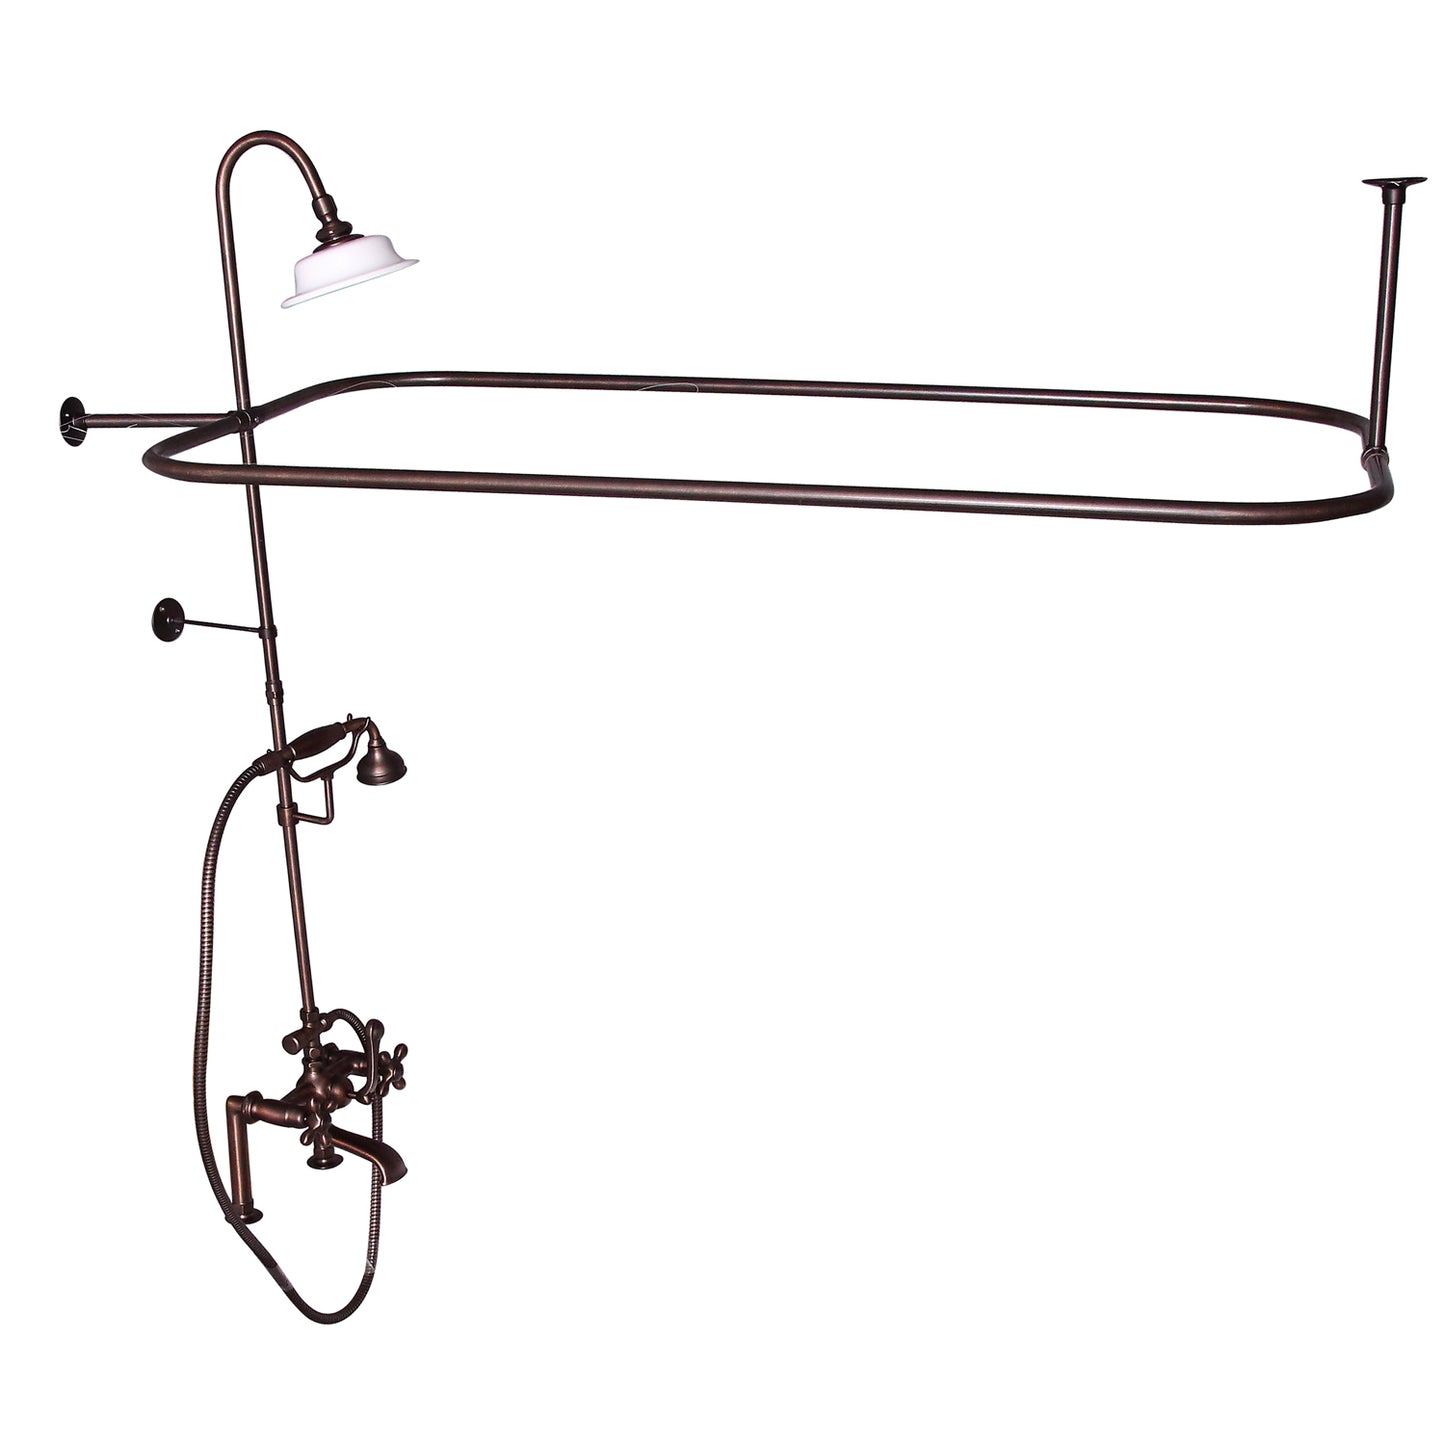 Complete Faucet & Shower Kit for Freestanding Tub 48" x 24" Rod, Cross Handle, Oil Rubbed Bronze